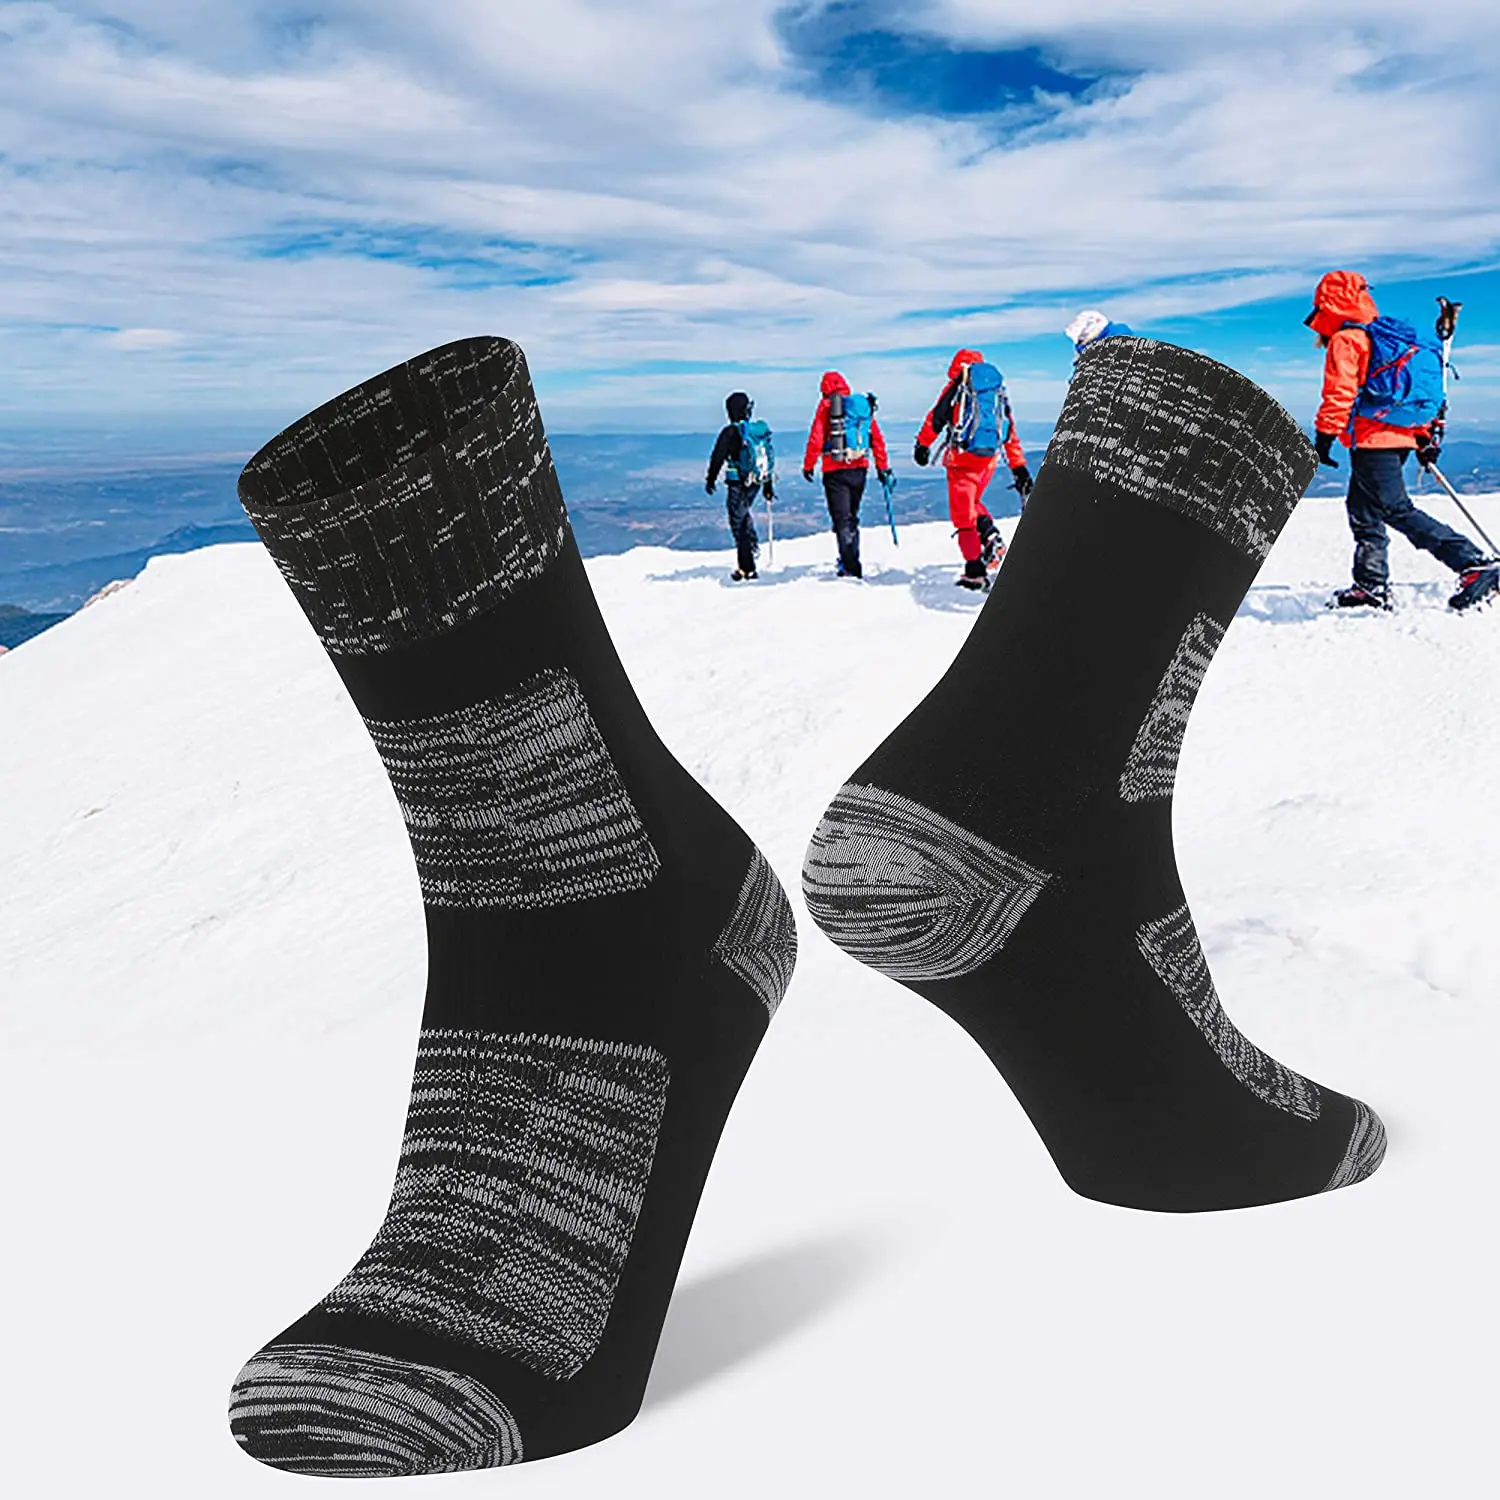 

Agdkuvfhd 100% Waterproof Breathable Socks Hiking Wading Trail Runing Skiing Cycling Crew Unisex Cushioned Outdoor Sports Socks